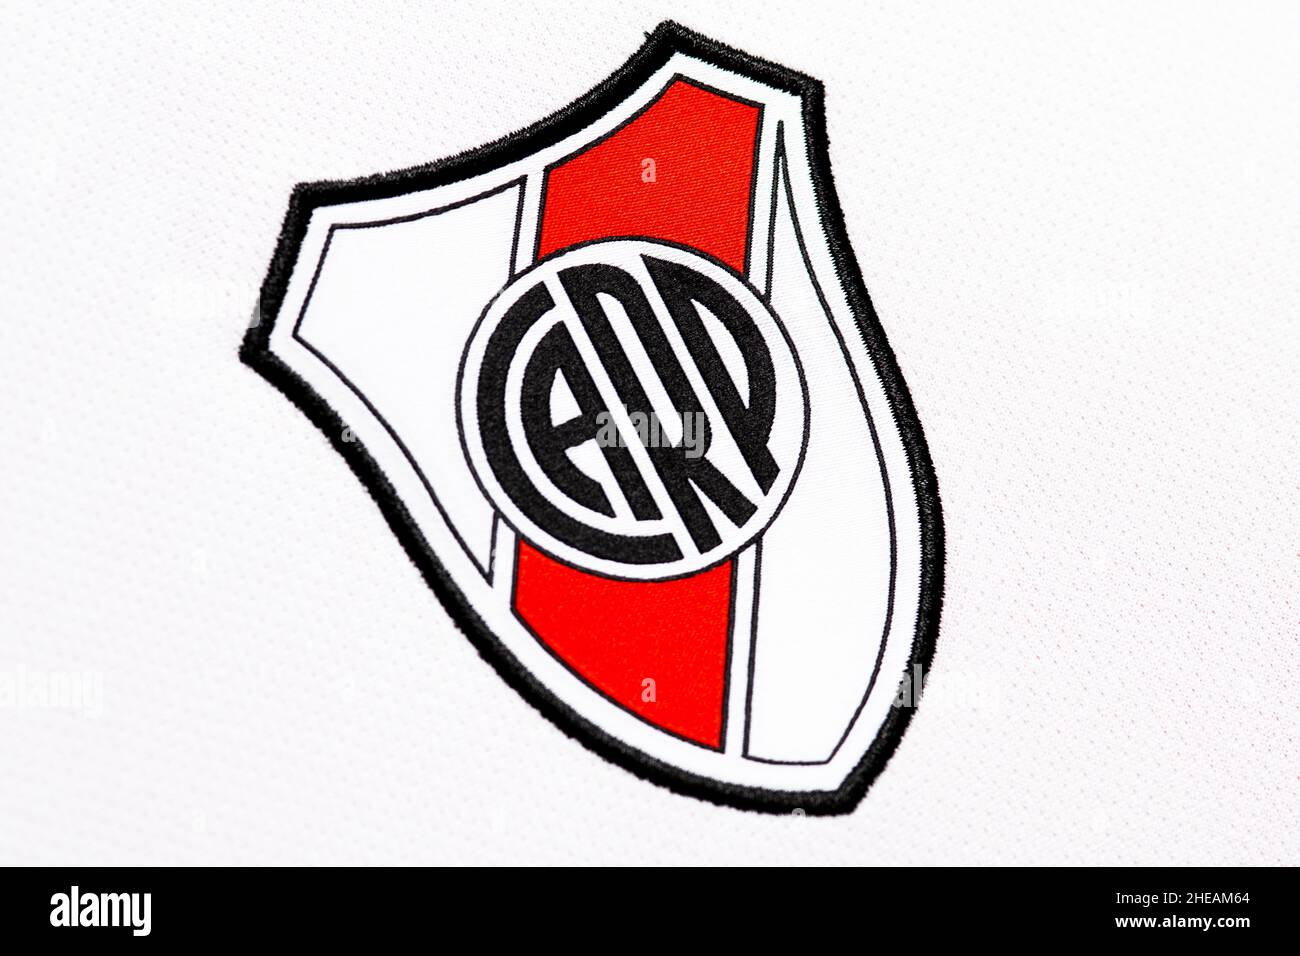 Club atletico river plate hi-res stock photography and images - Alamy